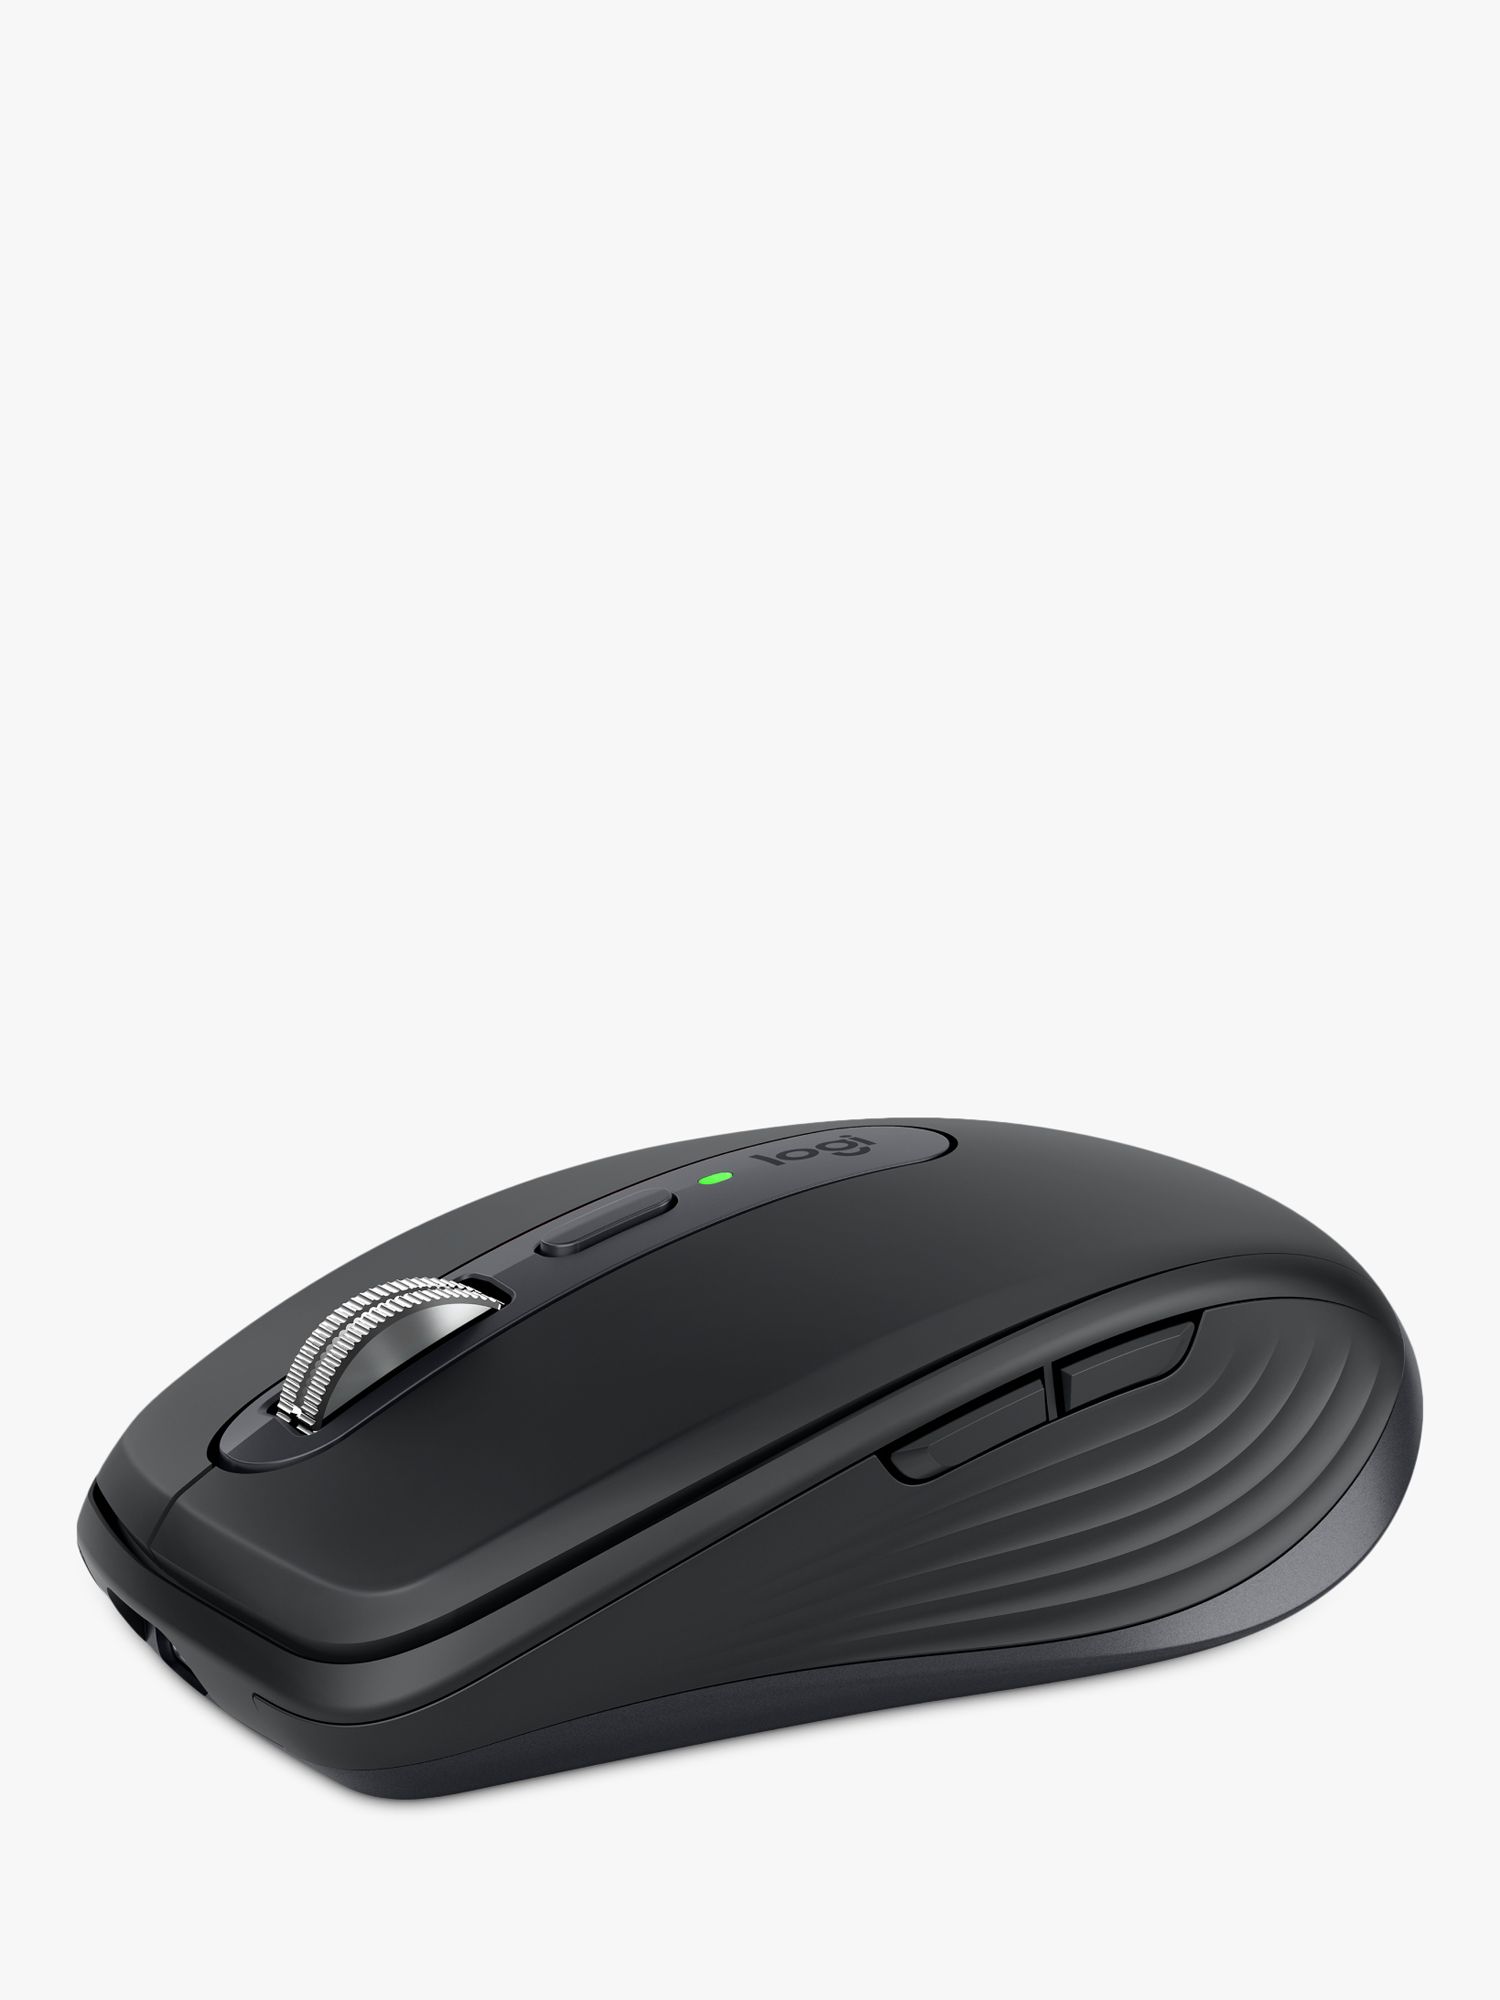 Logitech MX Anywhere 3 Review: Big Productivity, Small Wireless Mouse